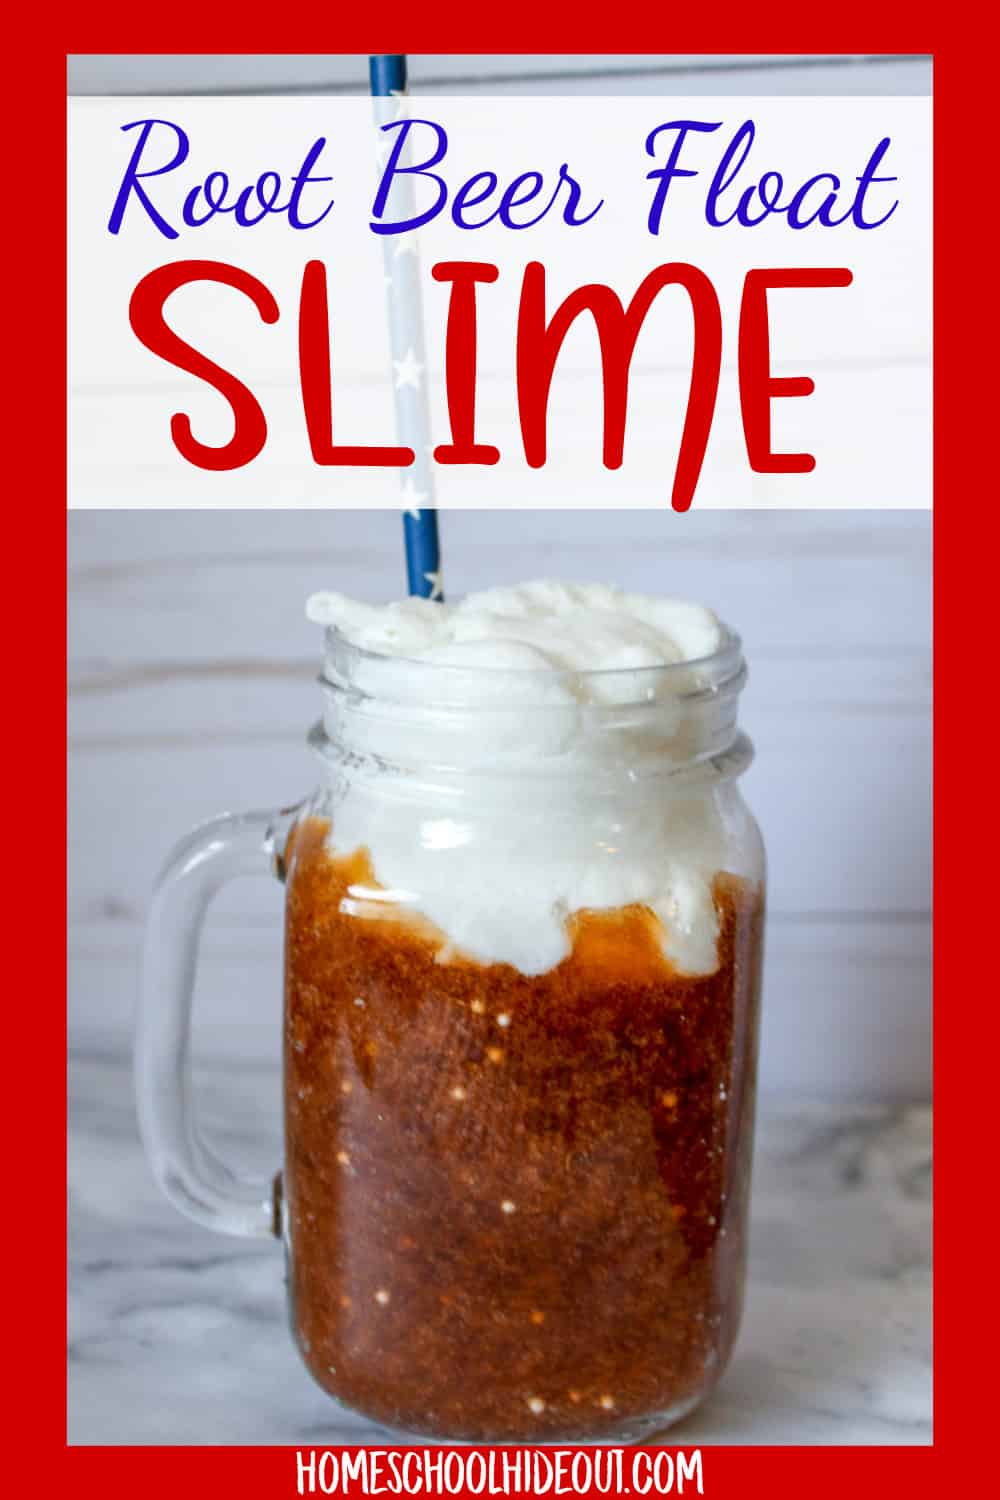 Who wouldn't love a simple root beer float slime? It'll make your taste buds water the whole time you're playing with it!